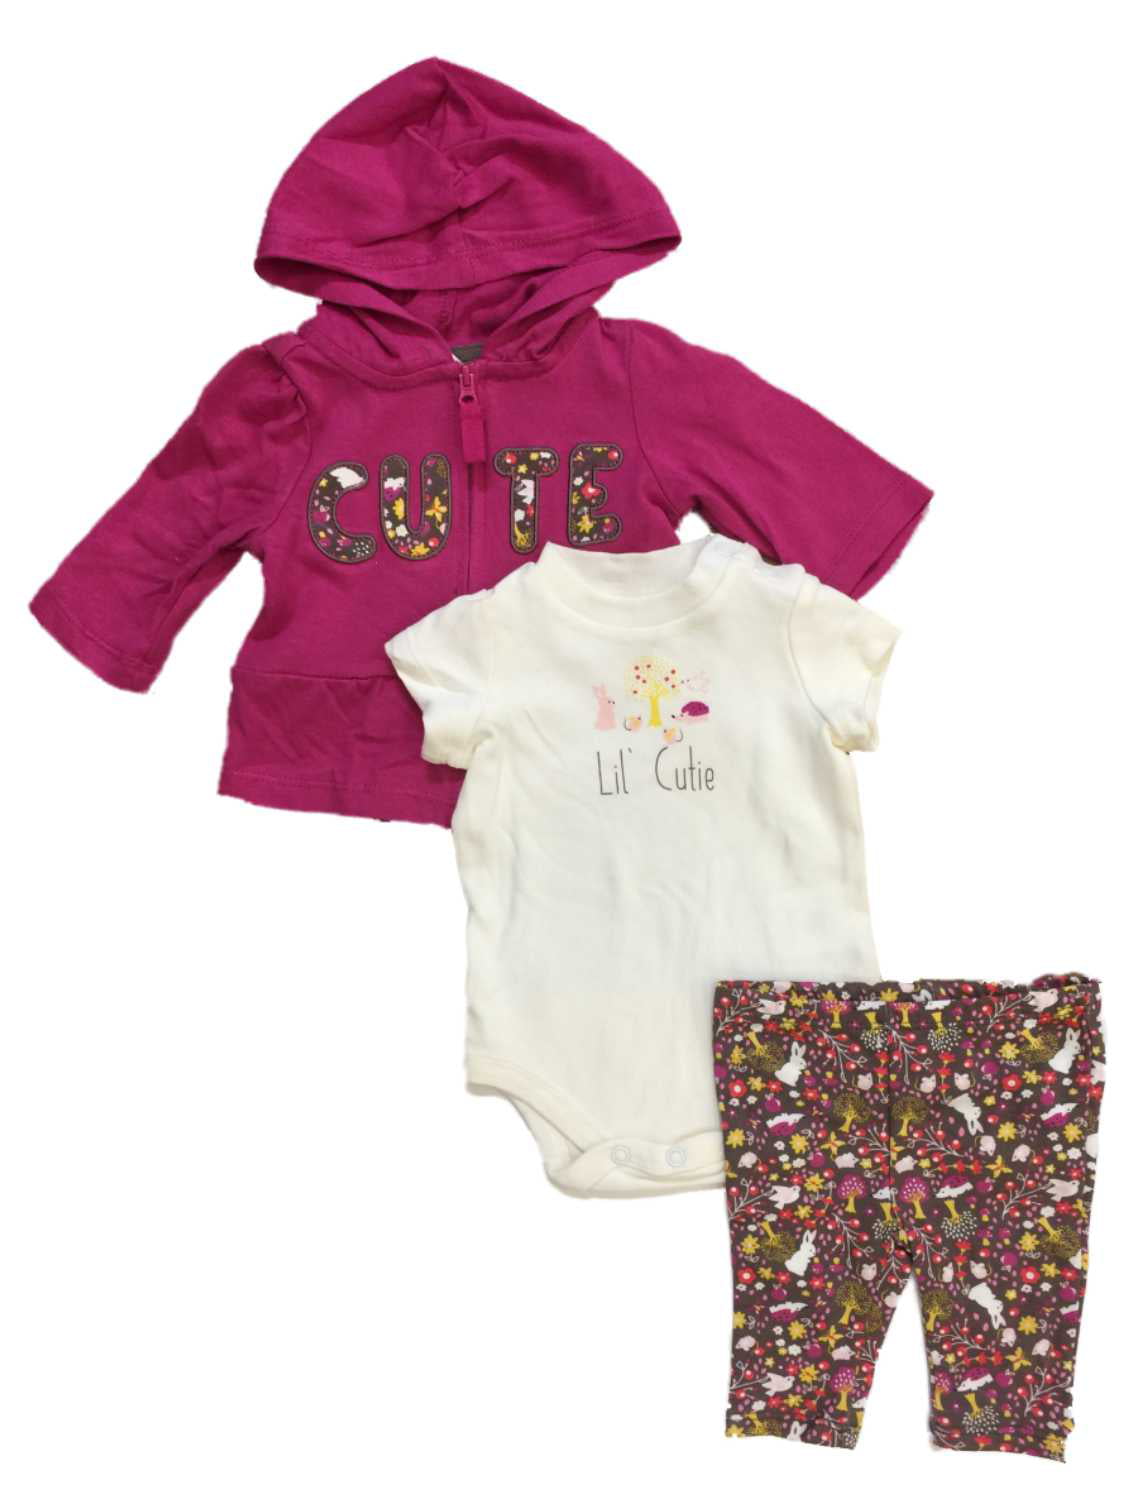 Baby girl New 4 piece oufit set by baby works layette size 3-6 mths little cutie